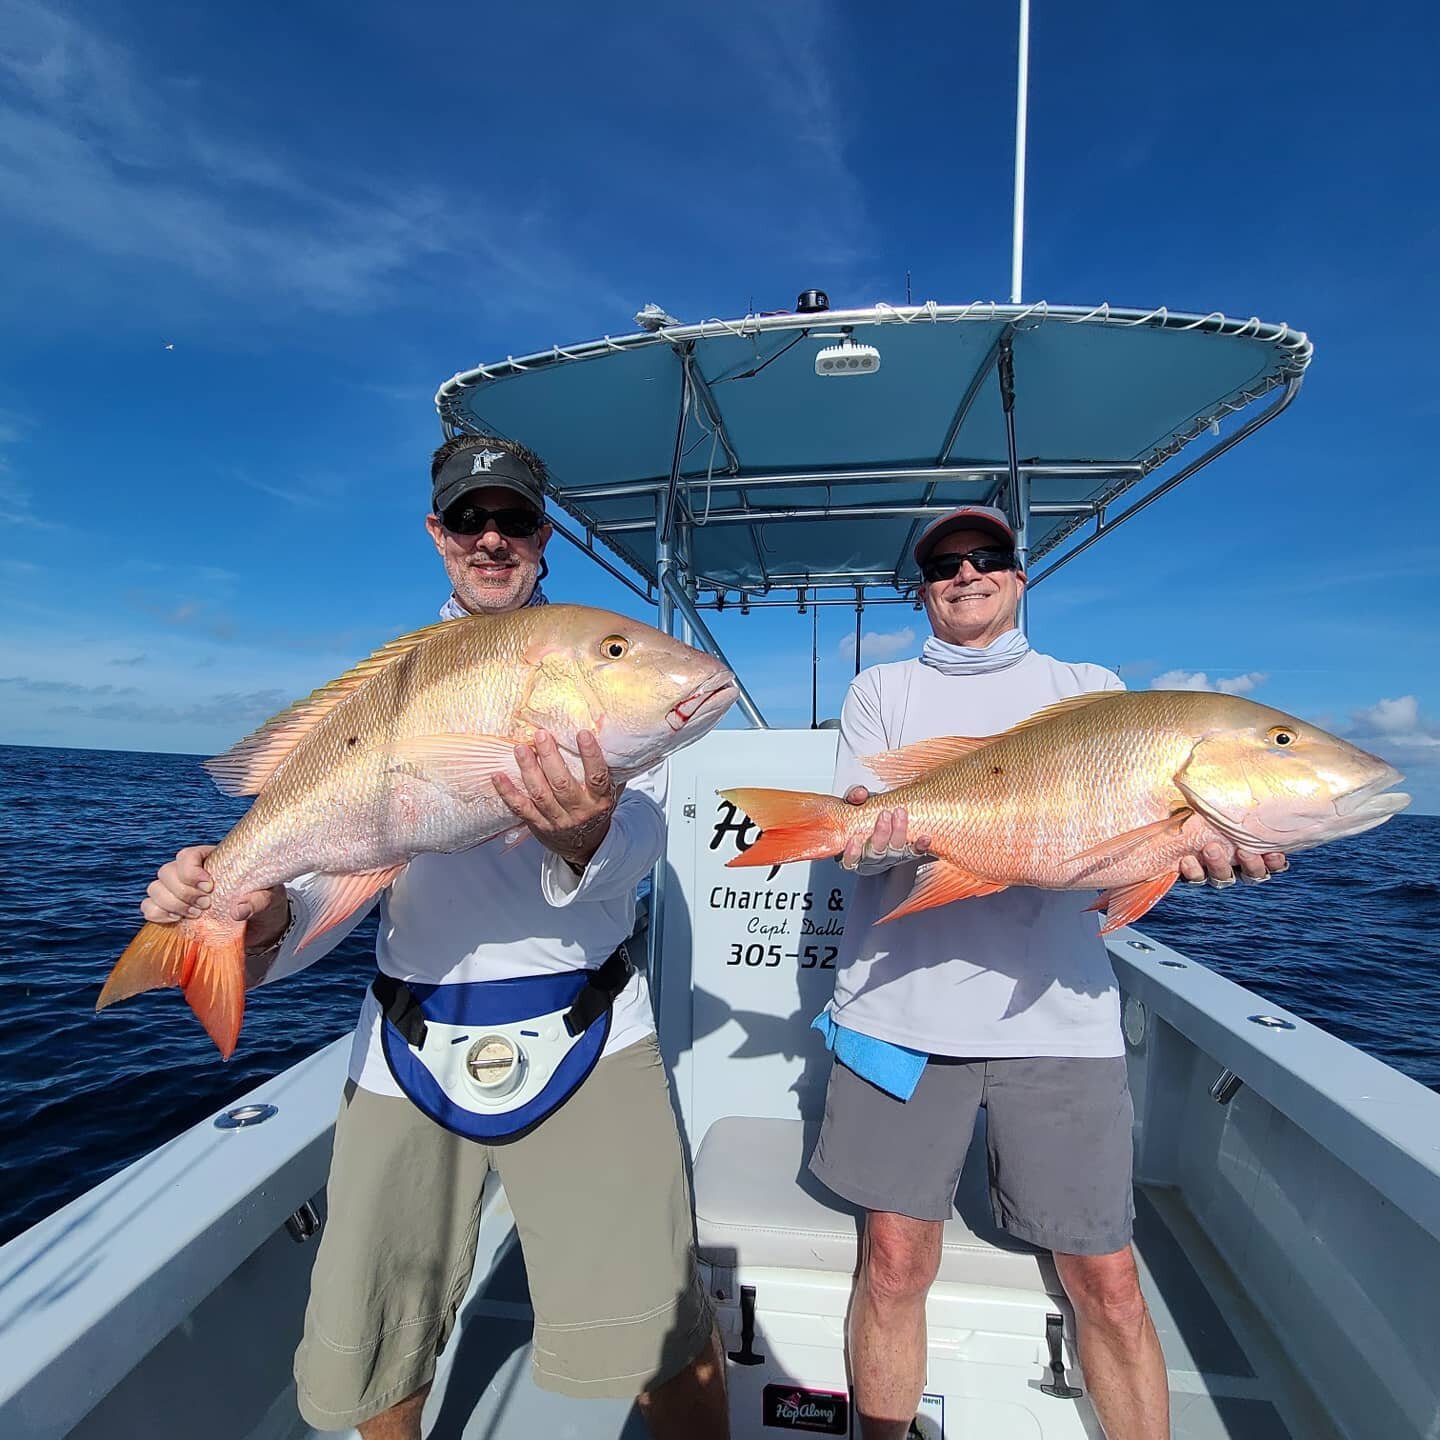 Super A-list customer Clay and his buddy showing off a double header of nice #muttonsnapper from an afternoon half a few weeks ago. The boys got the bites and turned the handles, putting together a #boxfull of good eats!
&bull;
#GUARANTEEDFISH 
&bull